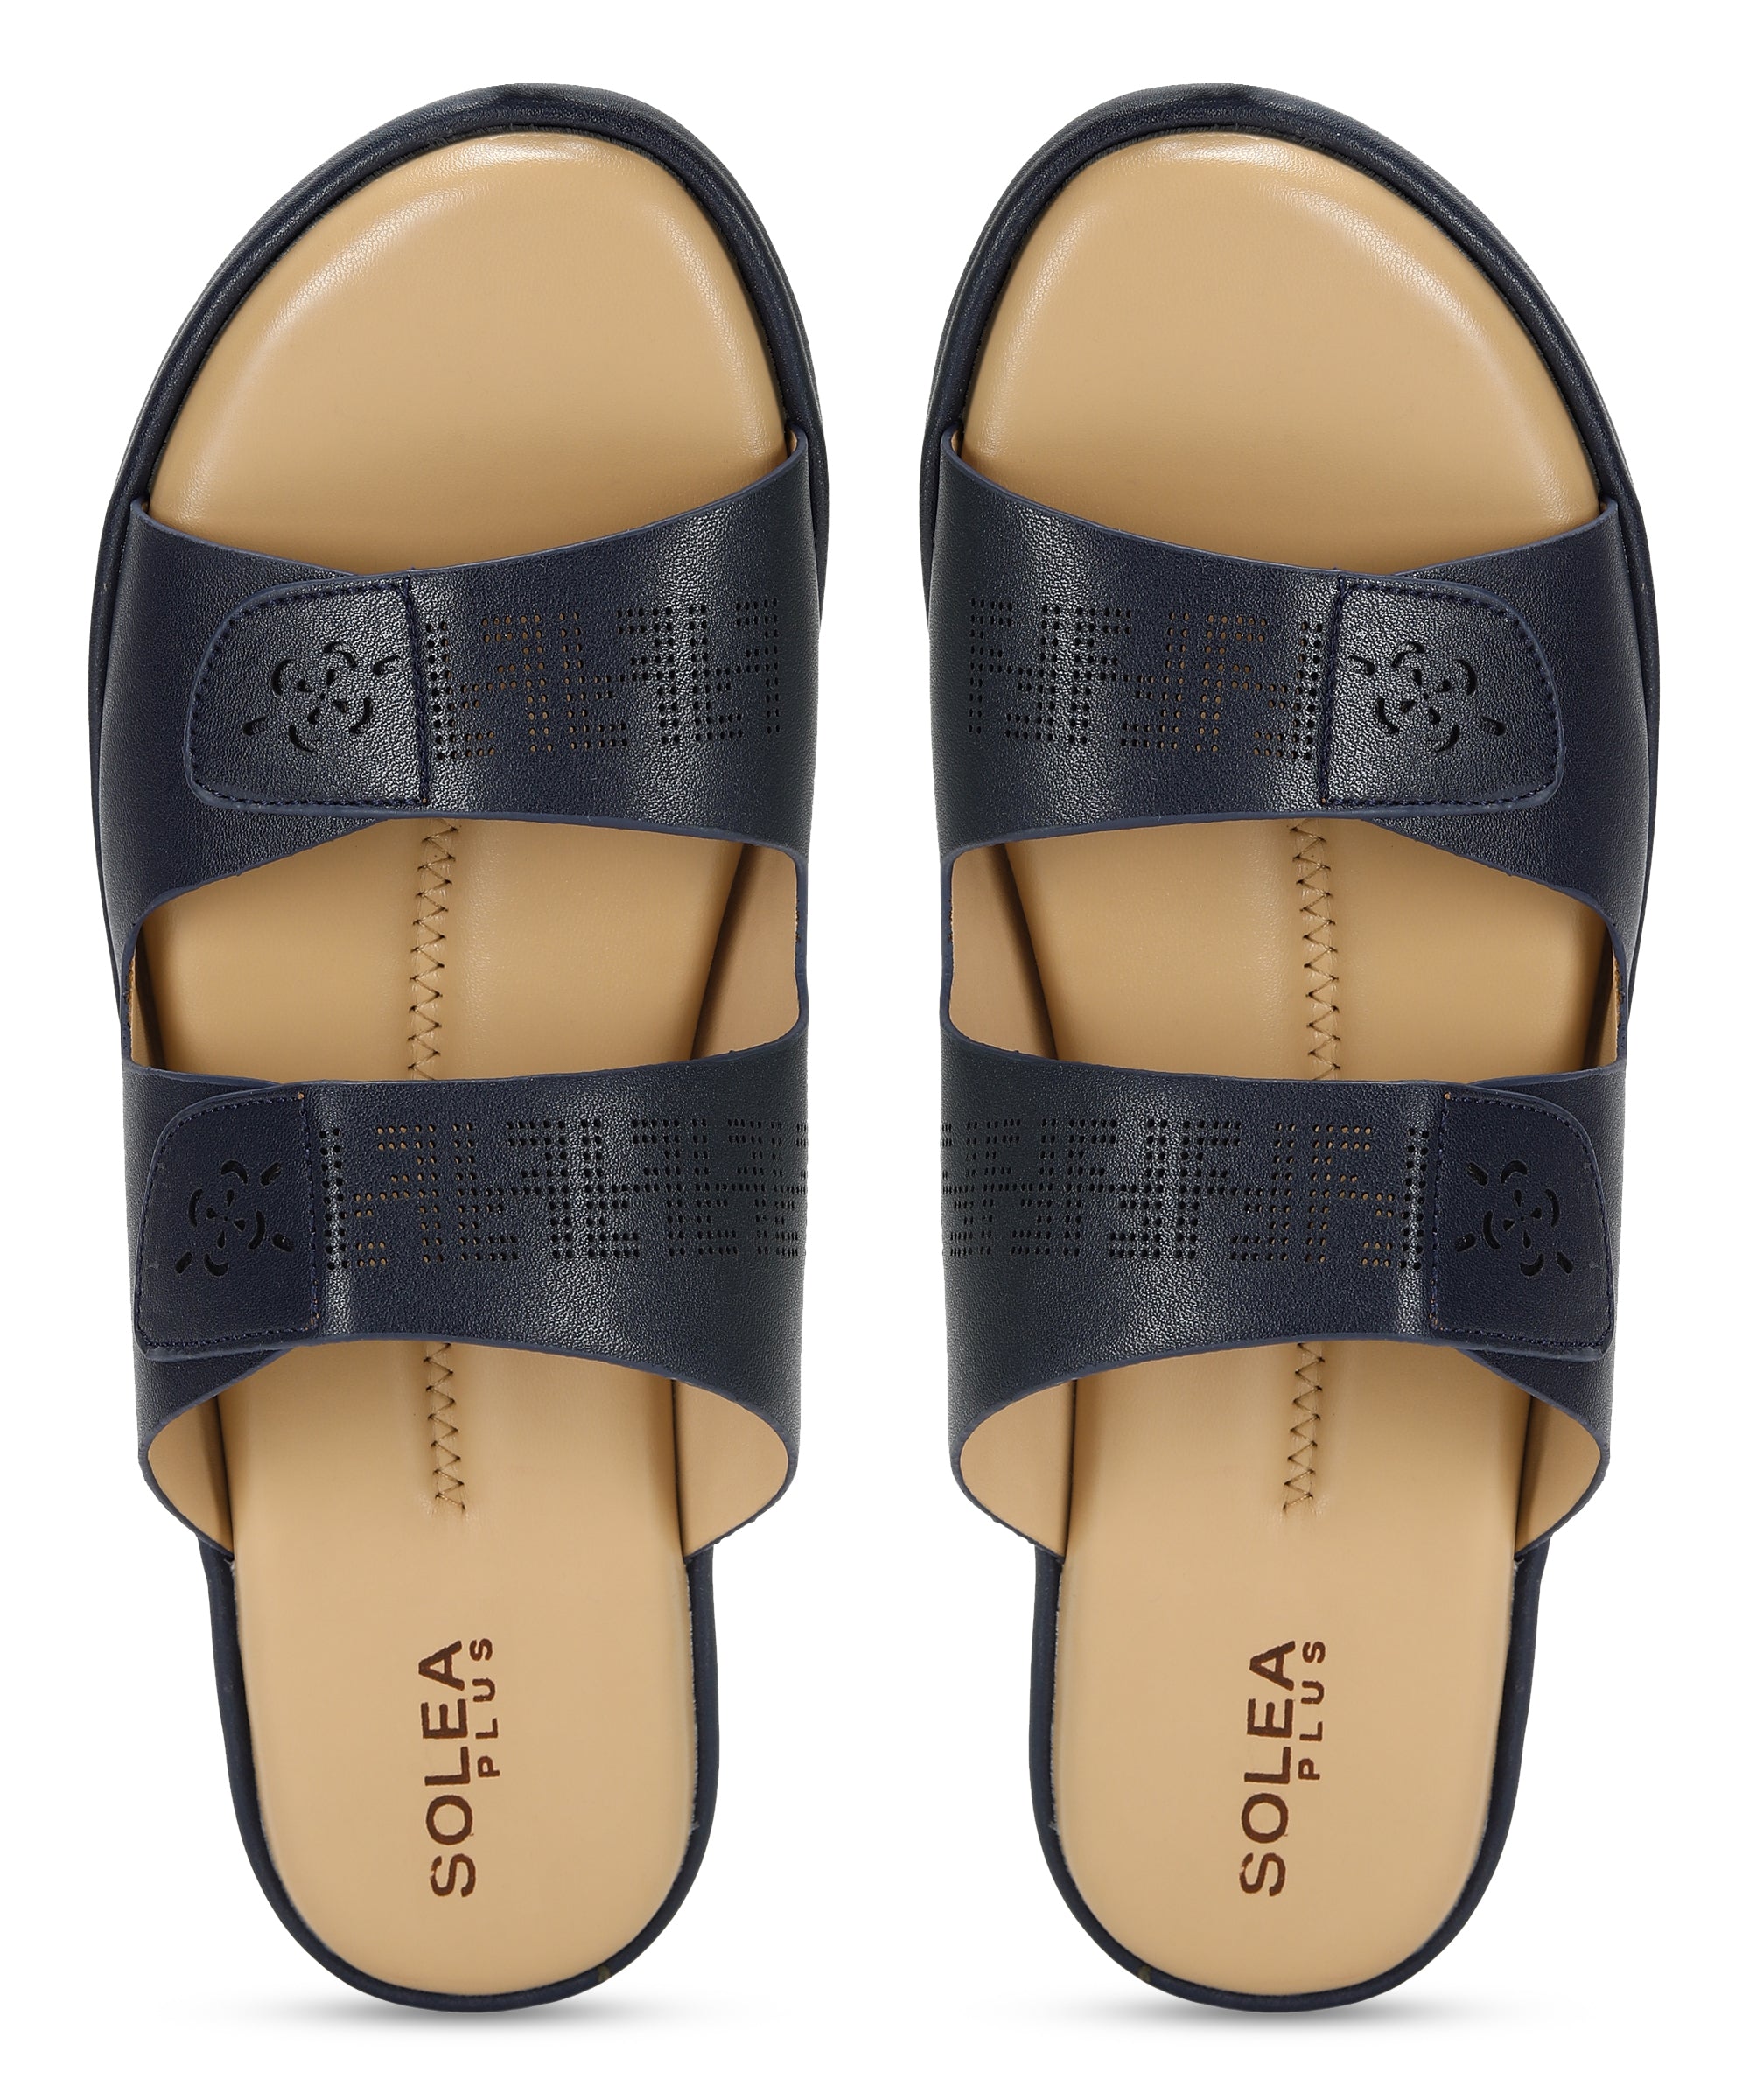 Paragon RK6028L Women Sandals | Casual &amp; Formal Sandals | Stylish, Comfortable &amp; Durable | For Daily &amp; Occasion Wear